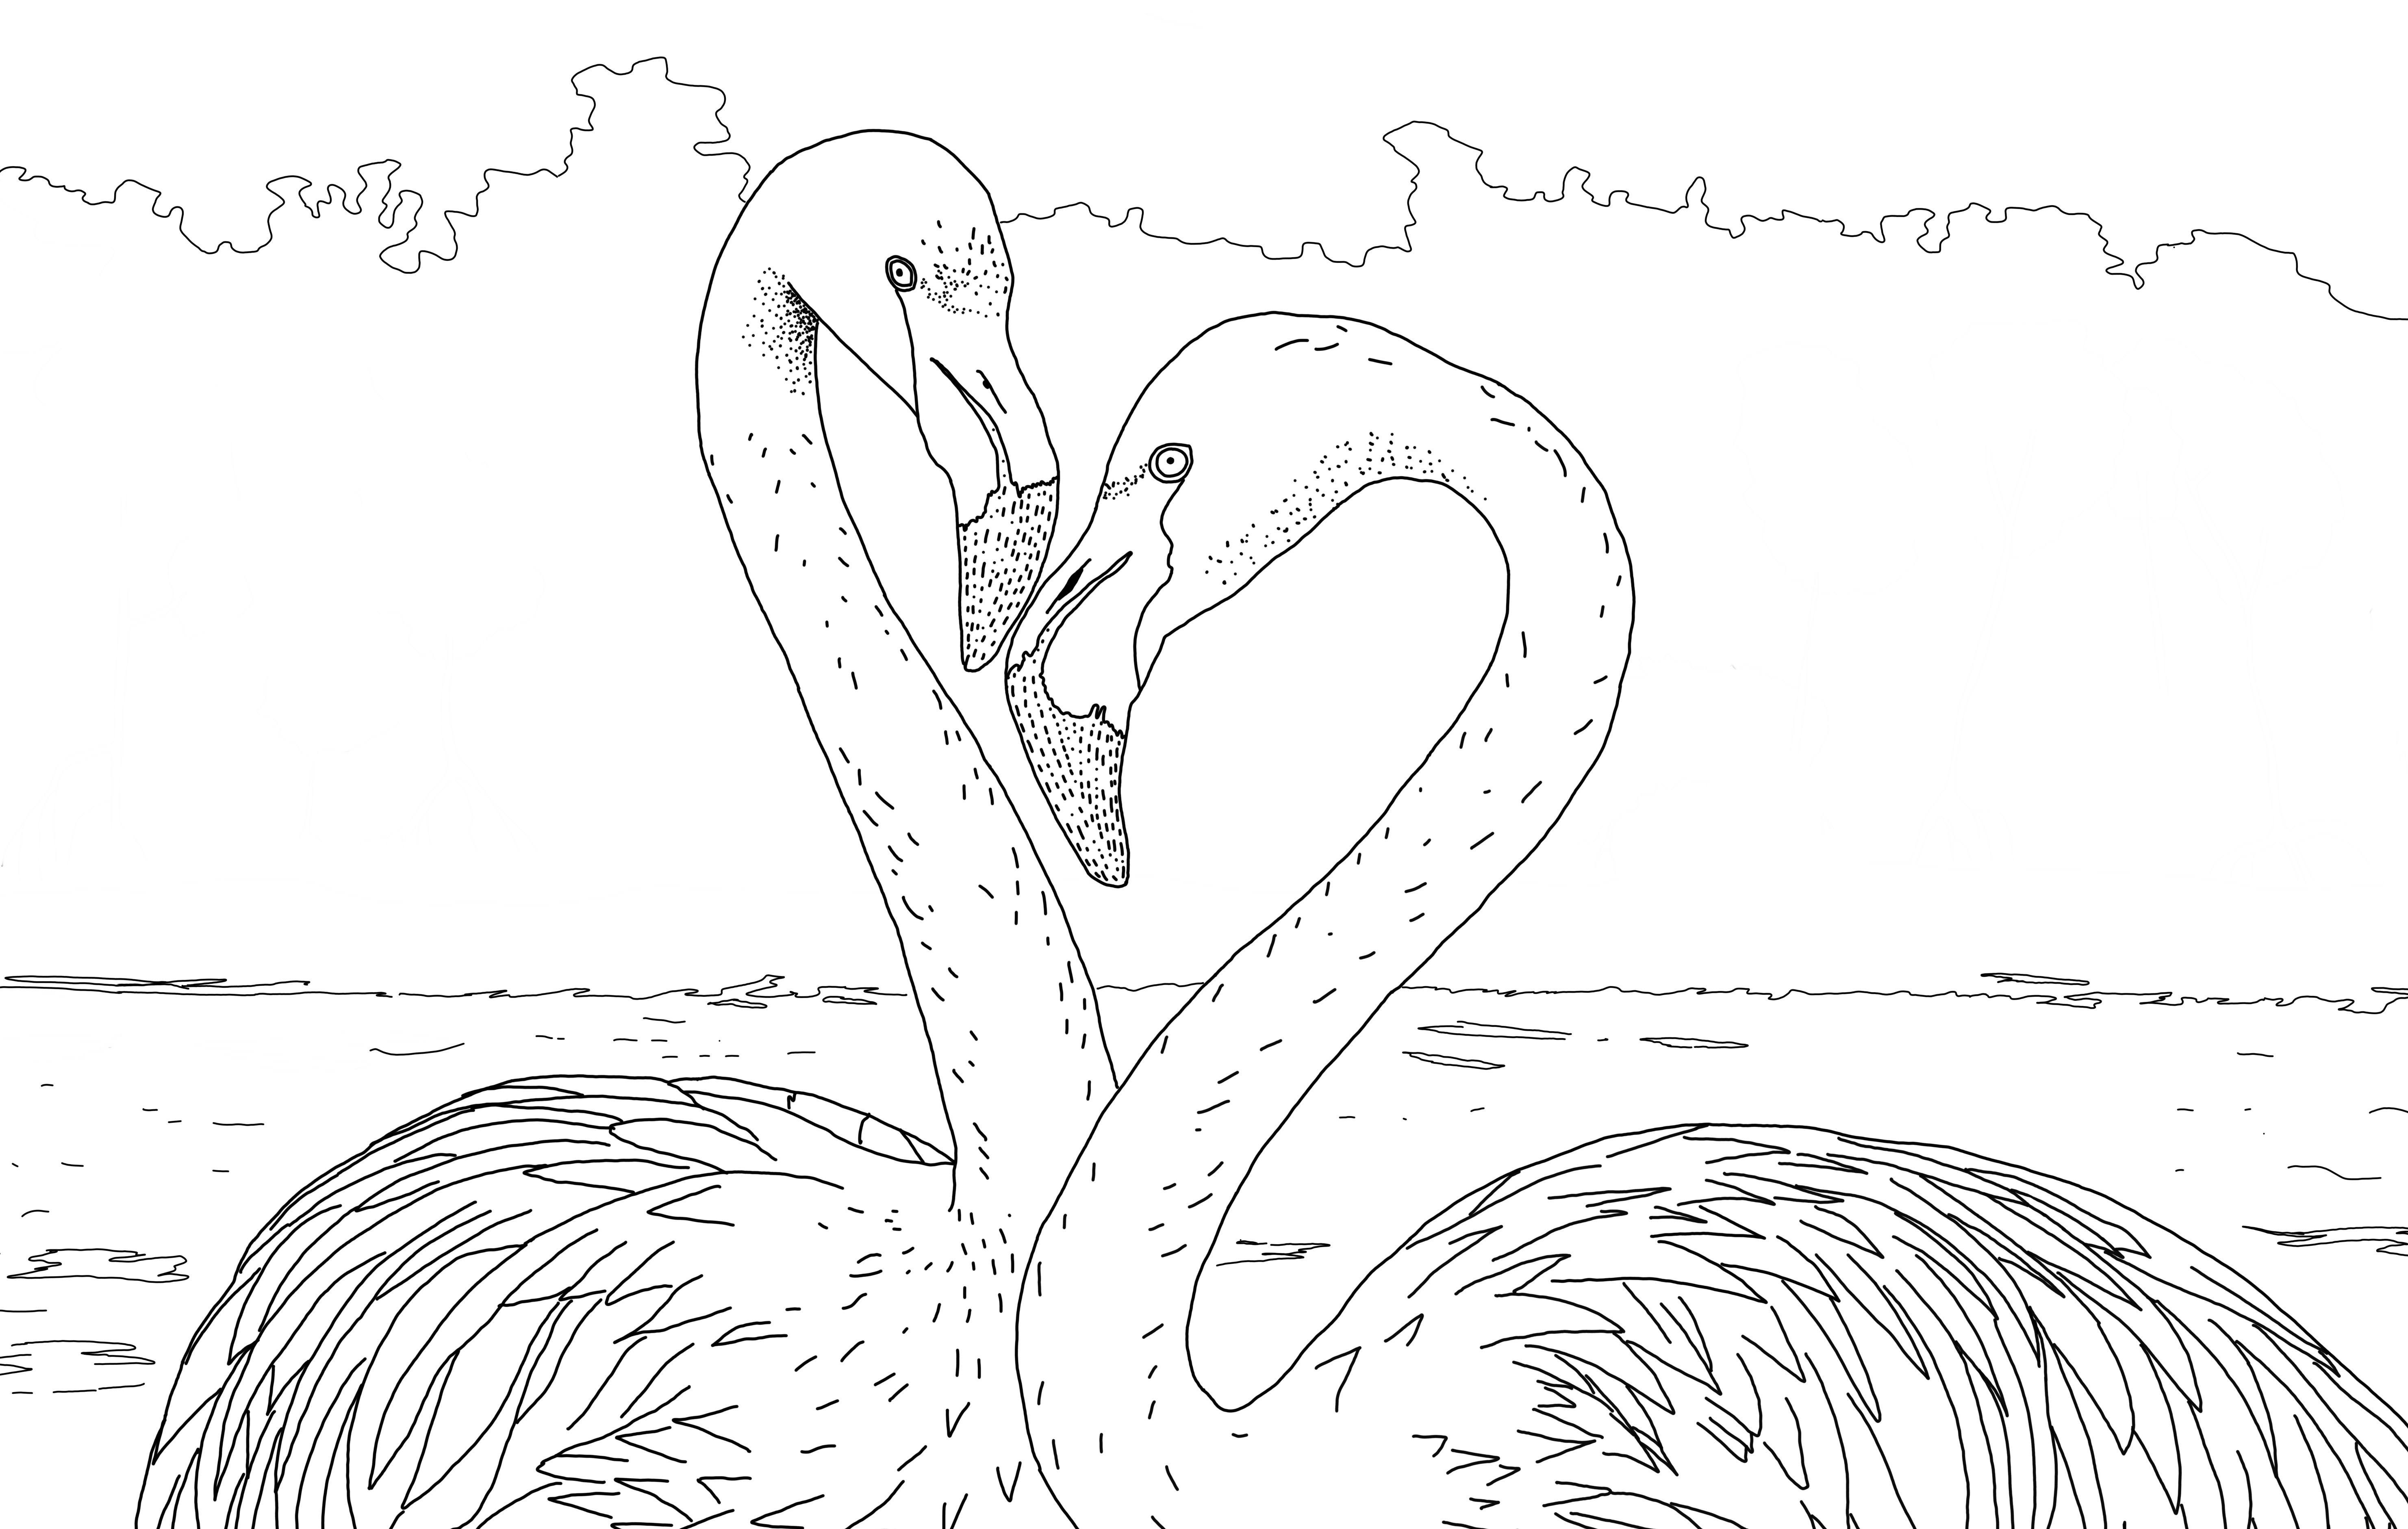 Queer Flamingos illustration from Queer Animals Coloring zine. Written by author of trans speculative fiction, Kes Otter Lieffe. Illustrated by Anja Van Geert. This coloring zine celebrates the diversity of animals and our beautiful queer communities.